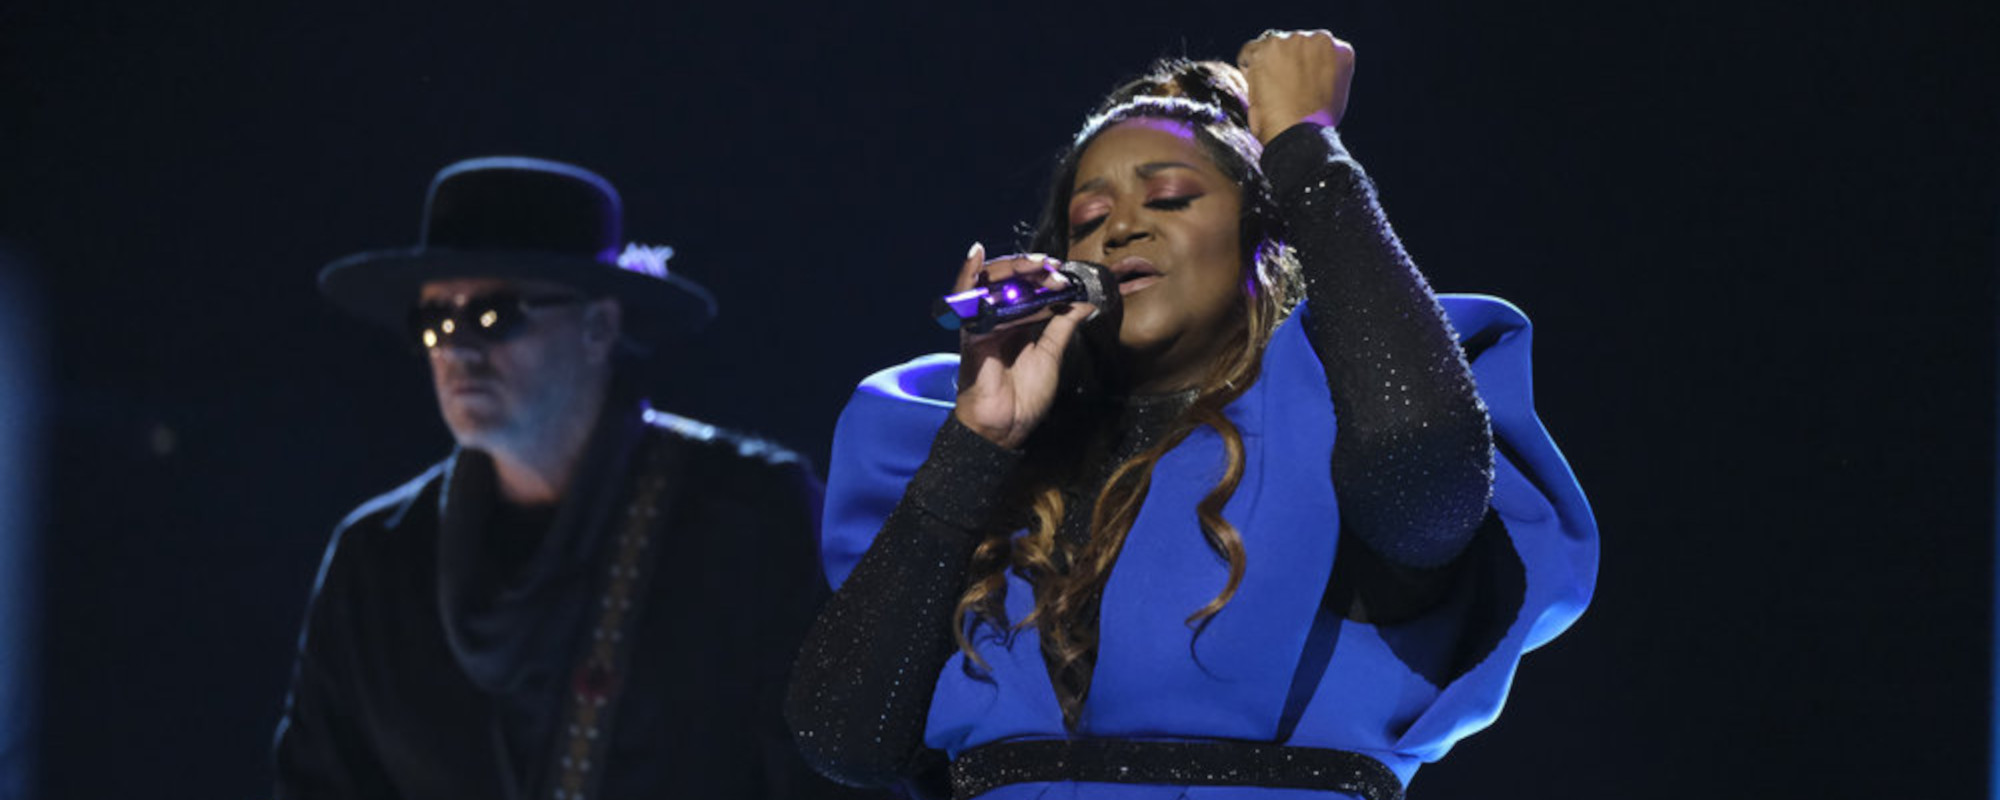 Blake Shelton Believes ‘The Voice’ Contestant Wendy Moten Could Win It All